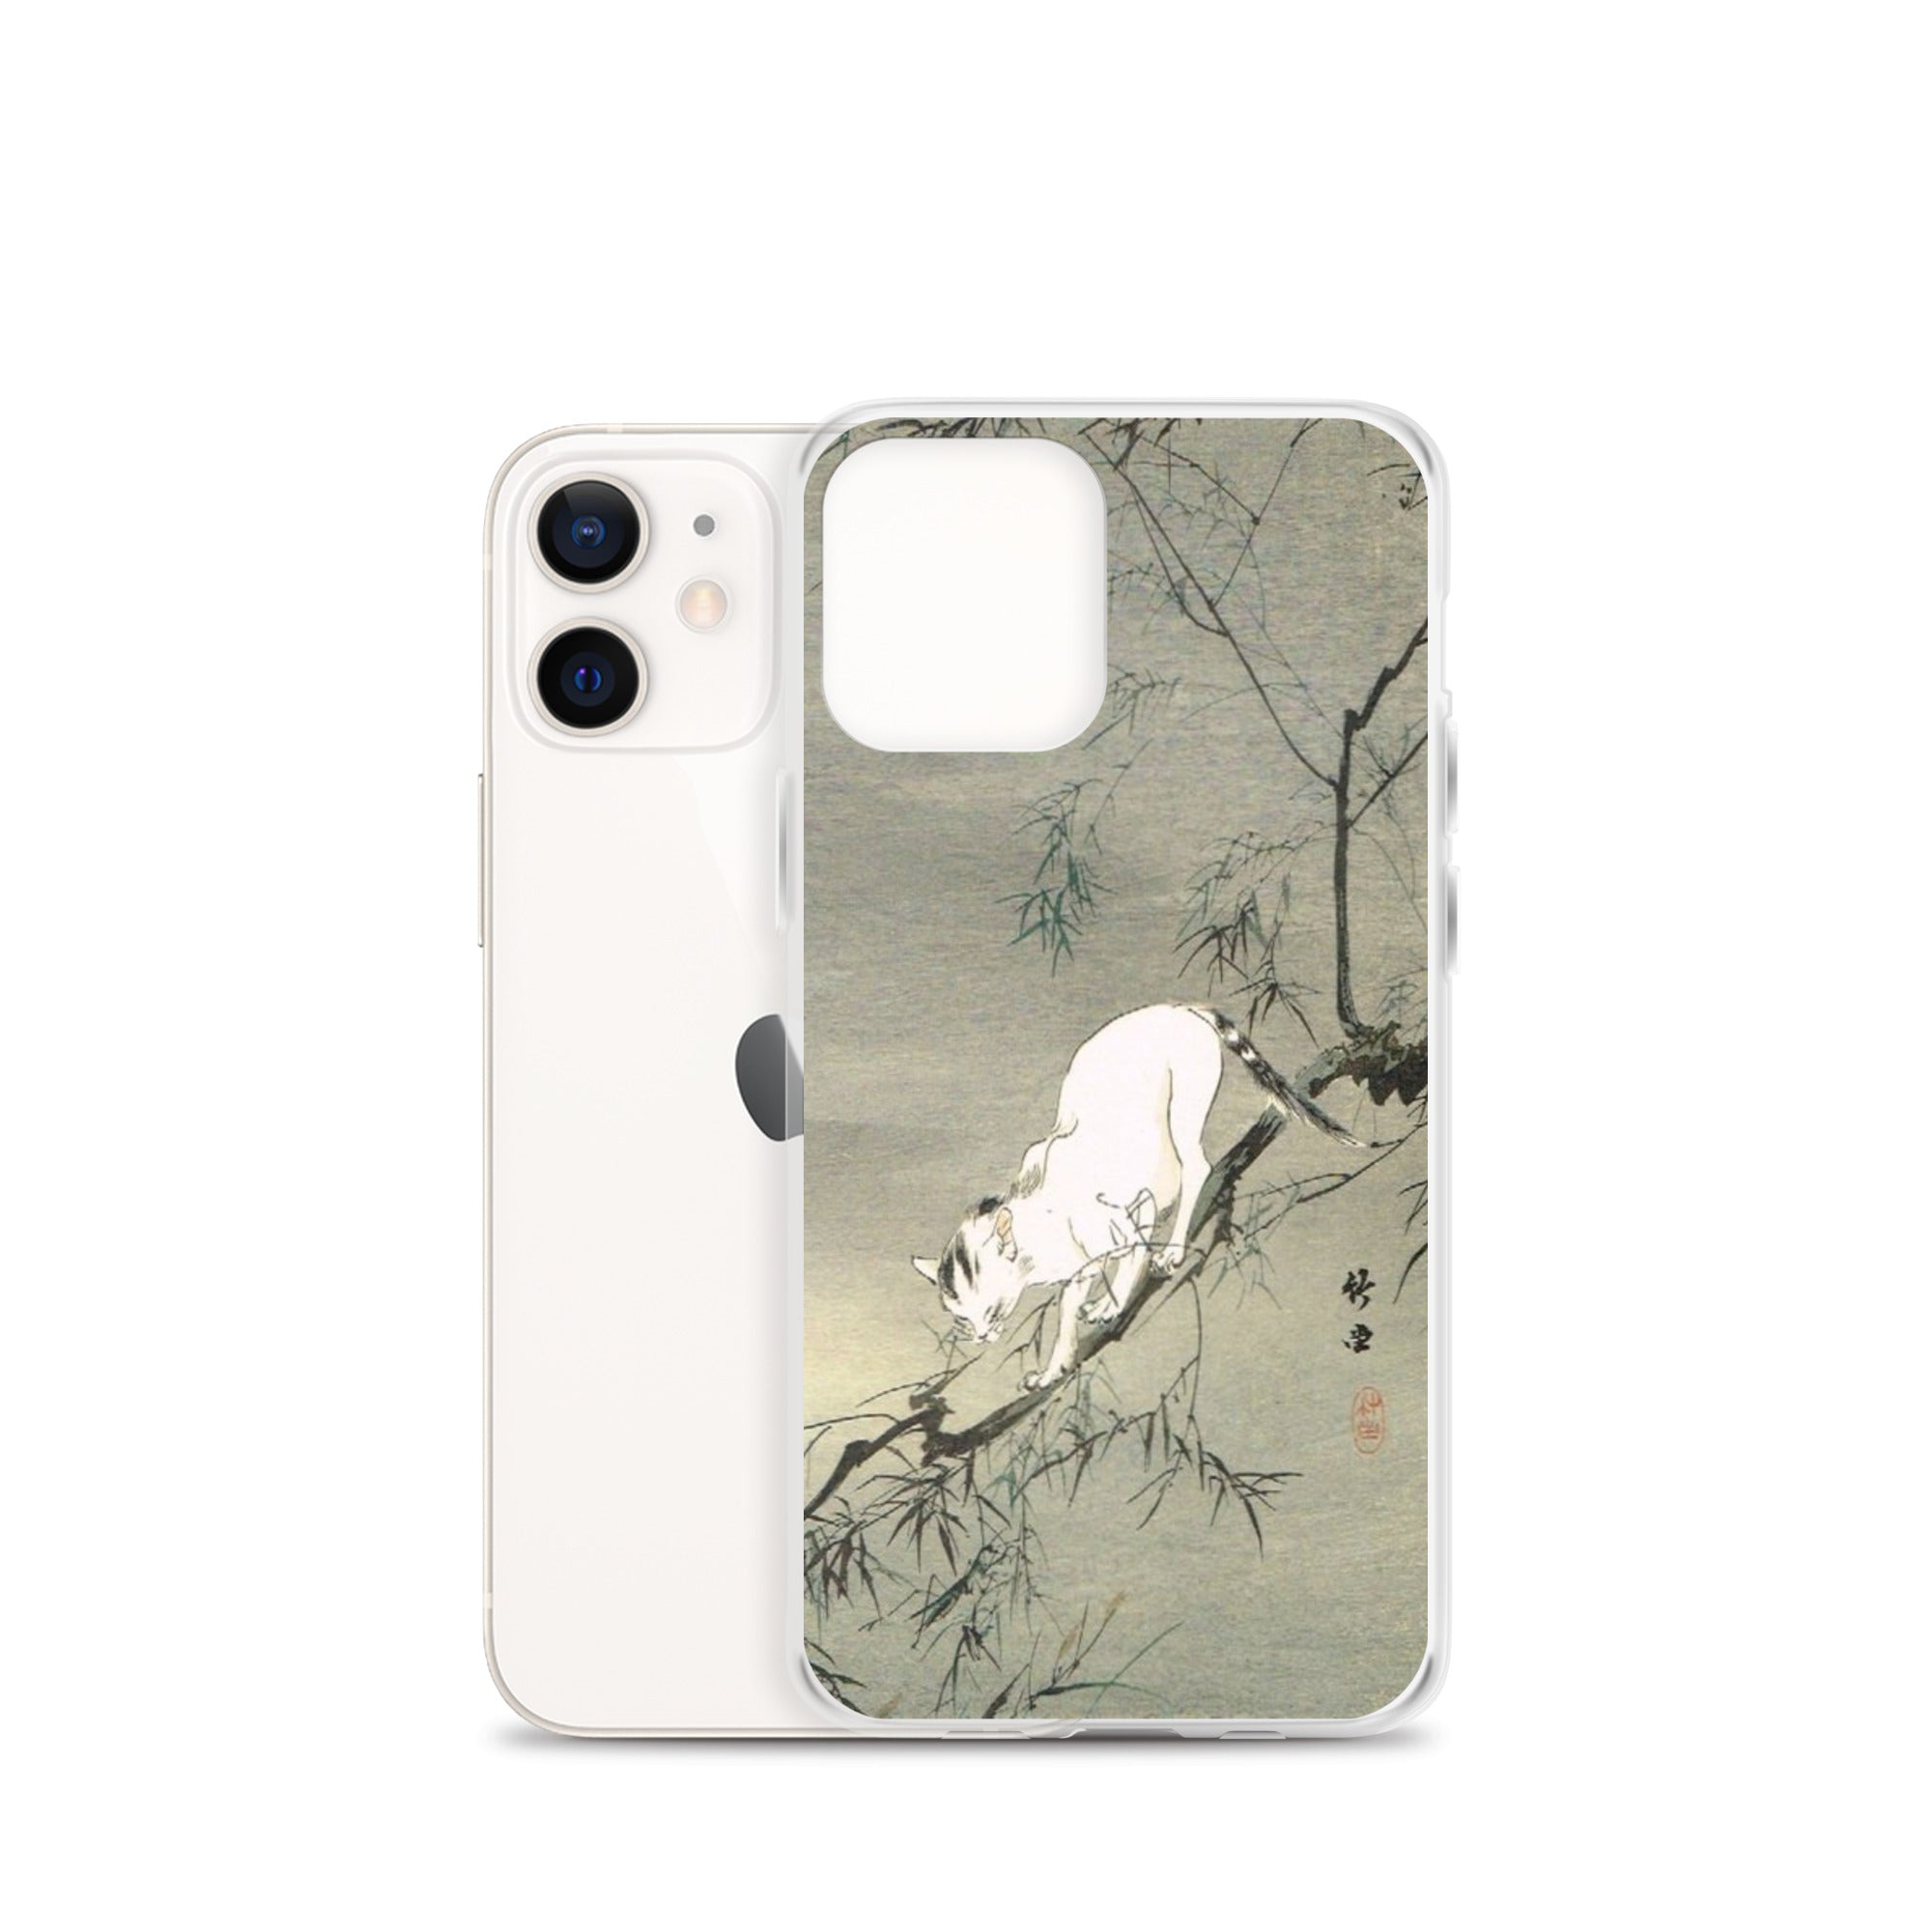 A Cat on a Tree Branch by Kishi Chikudo iPhone Case